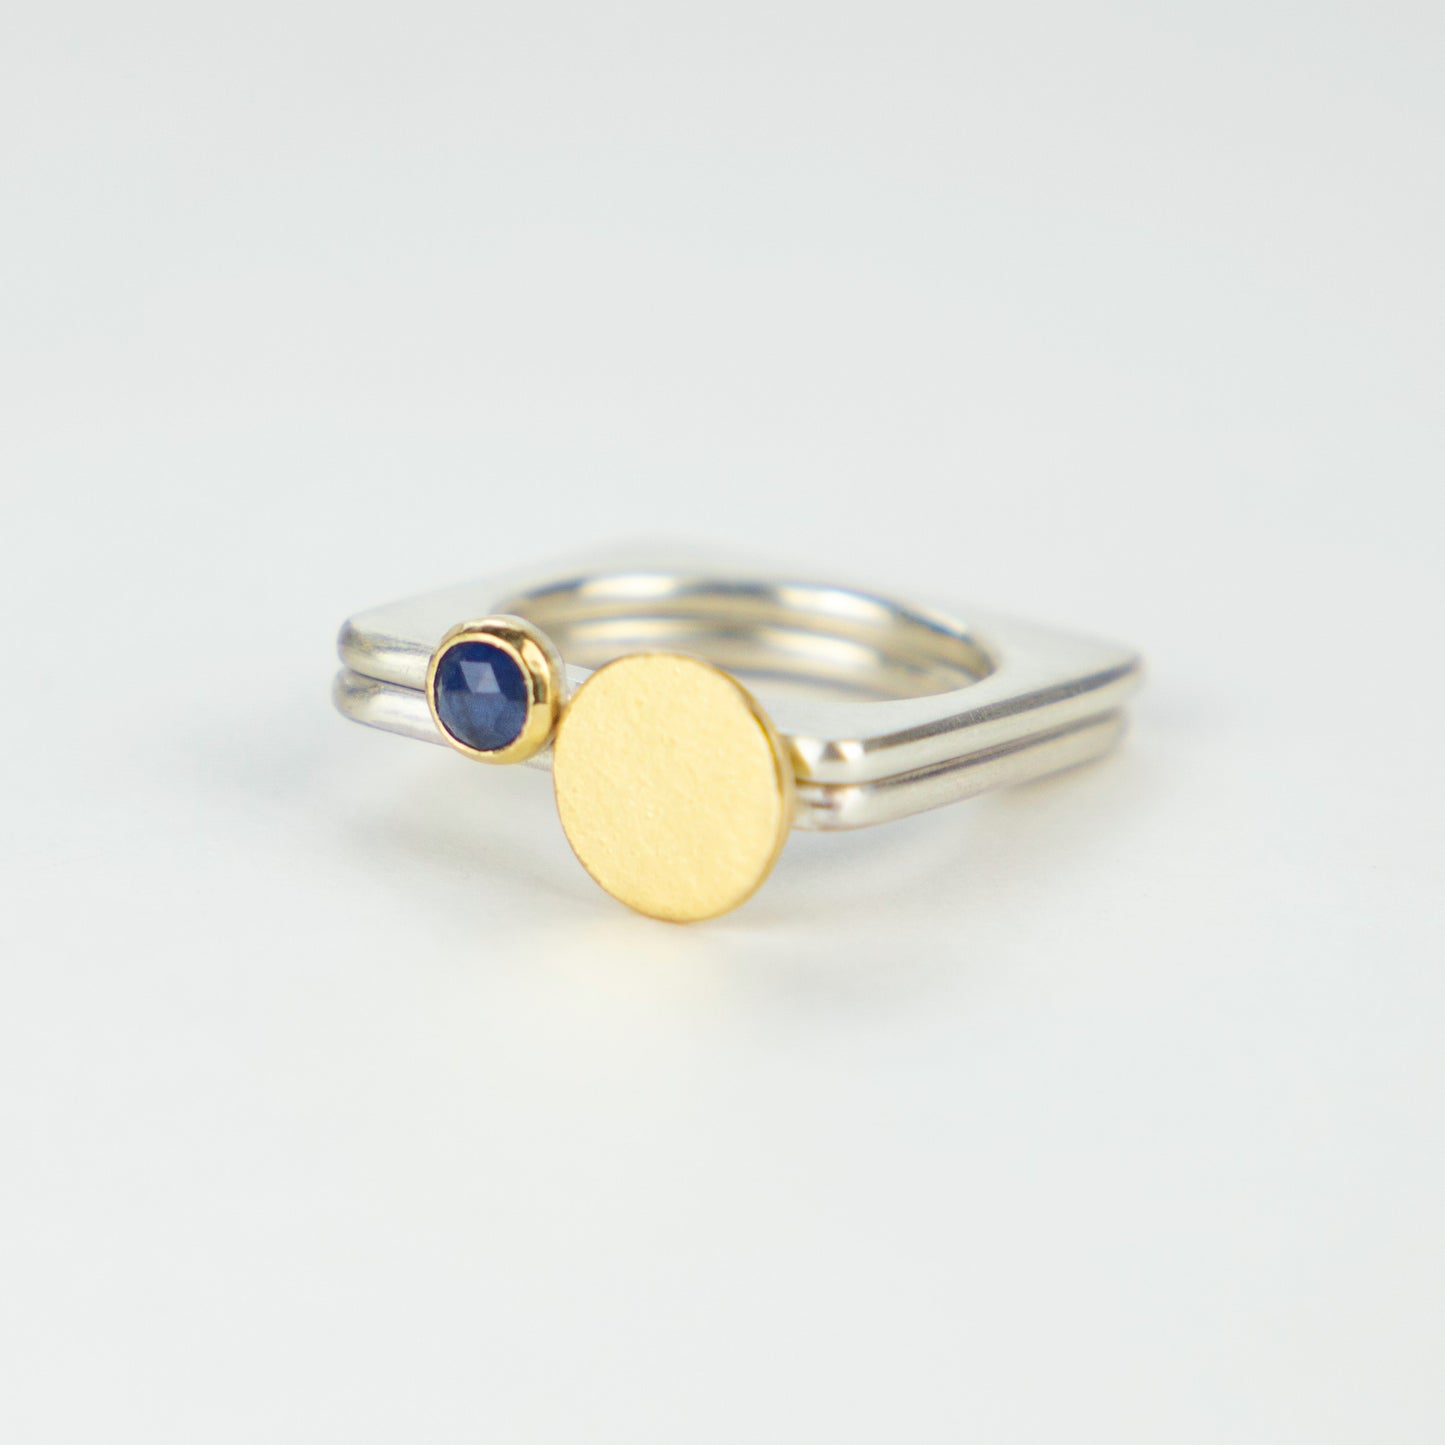 A square ring in silver with a gold disc or 'Moon'.